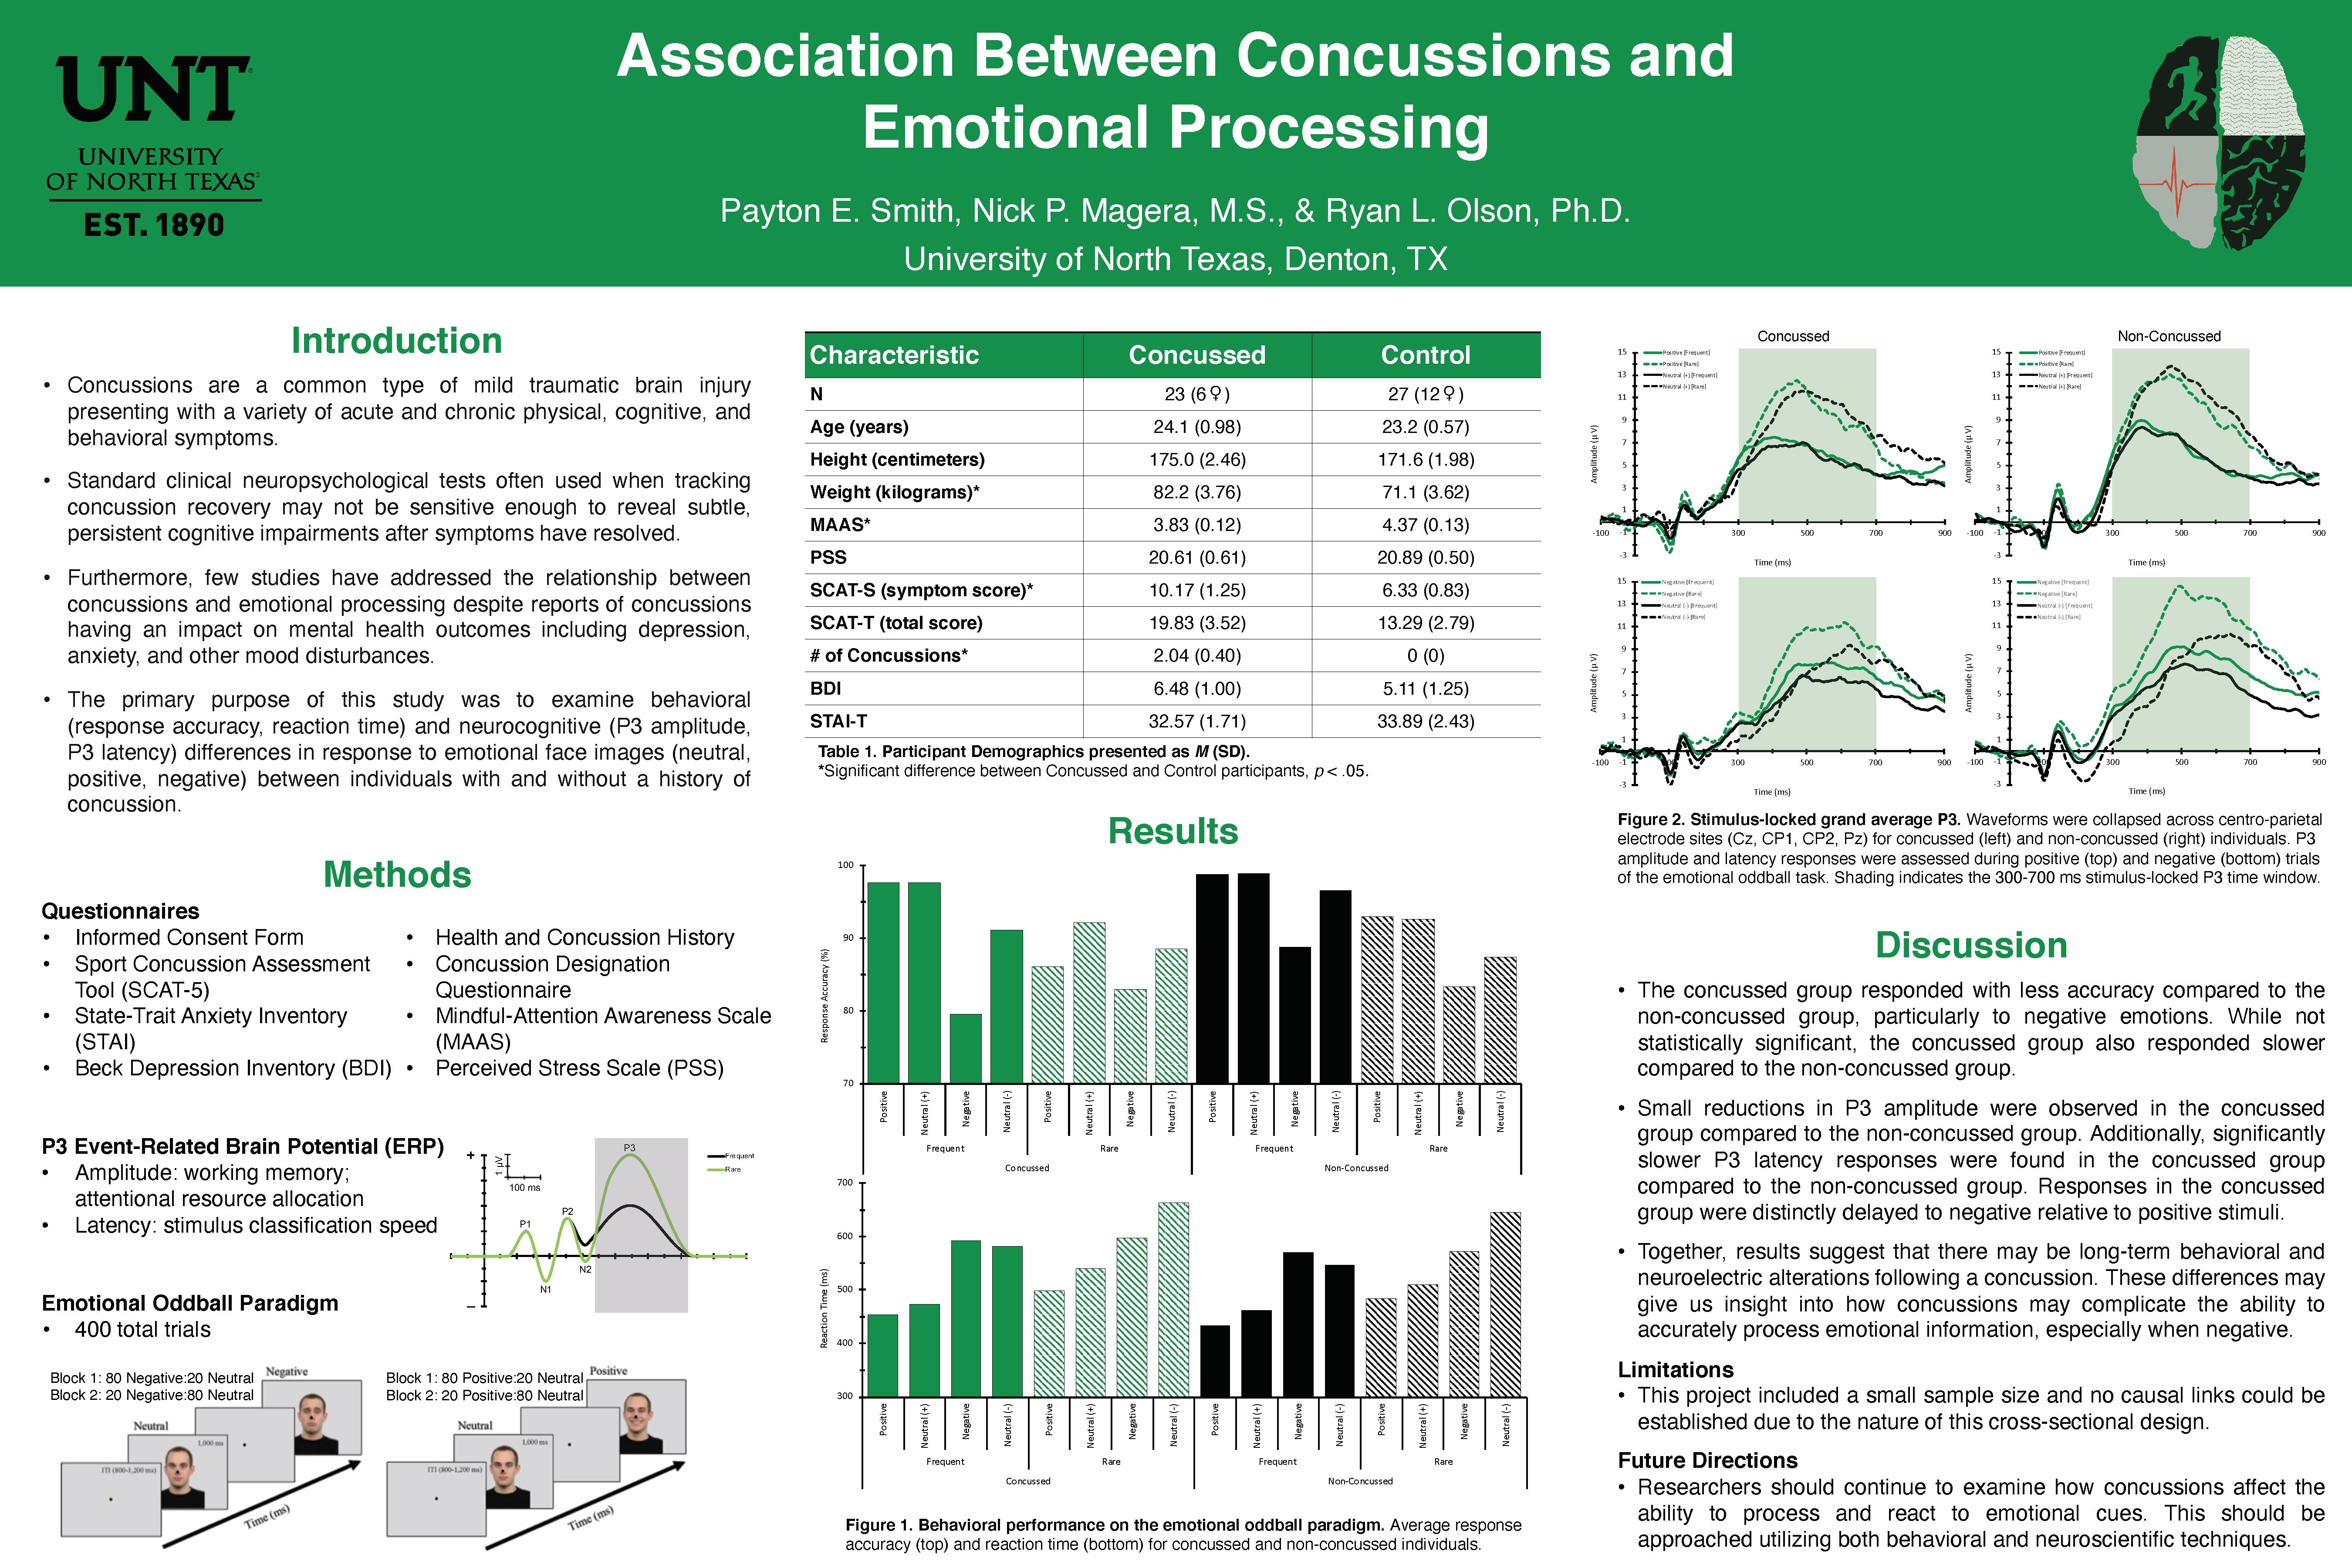 Association Between Concussions and Emotional Processing